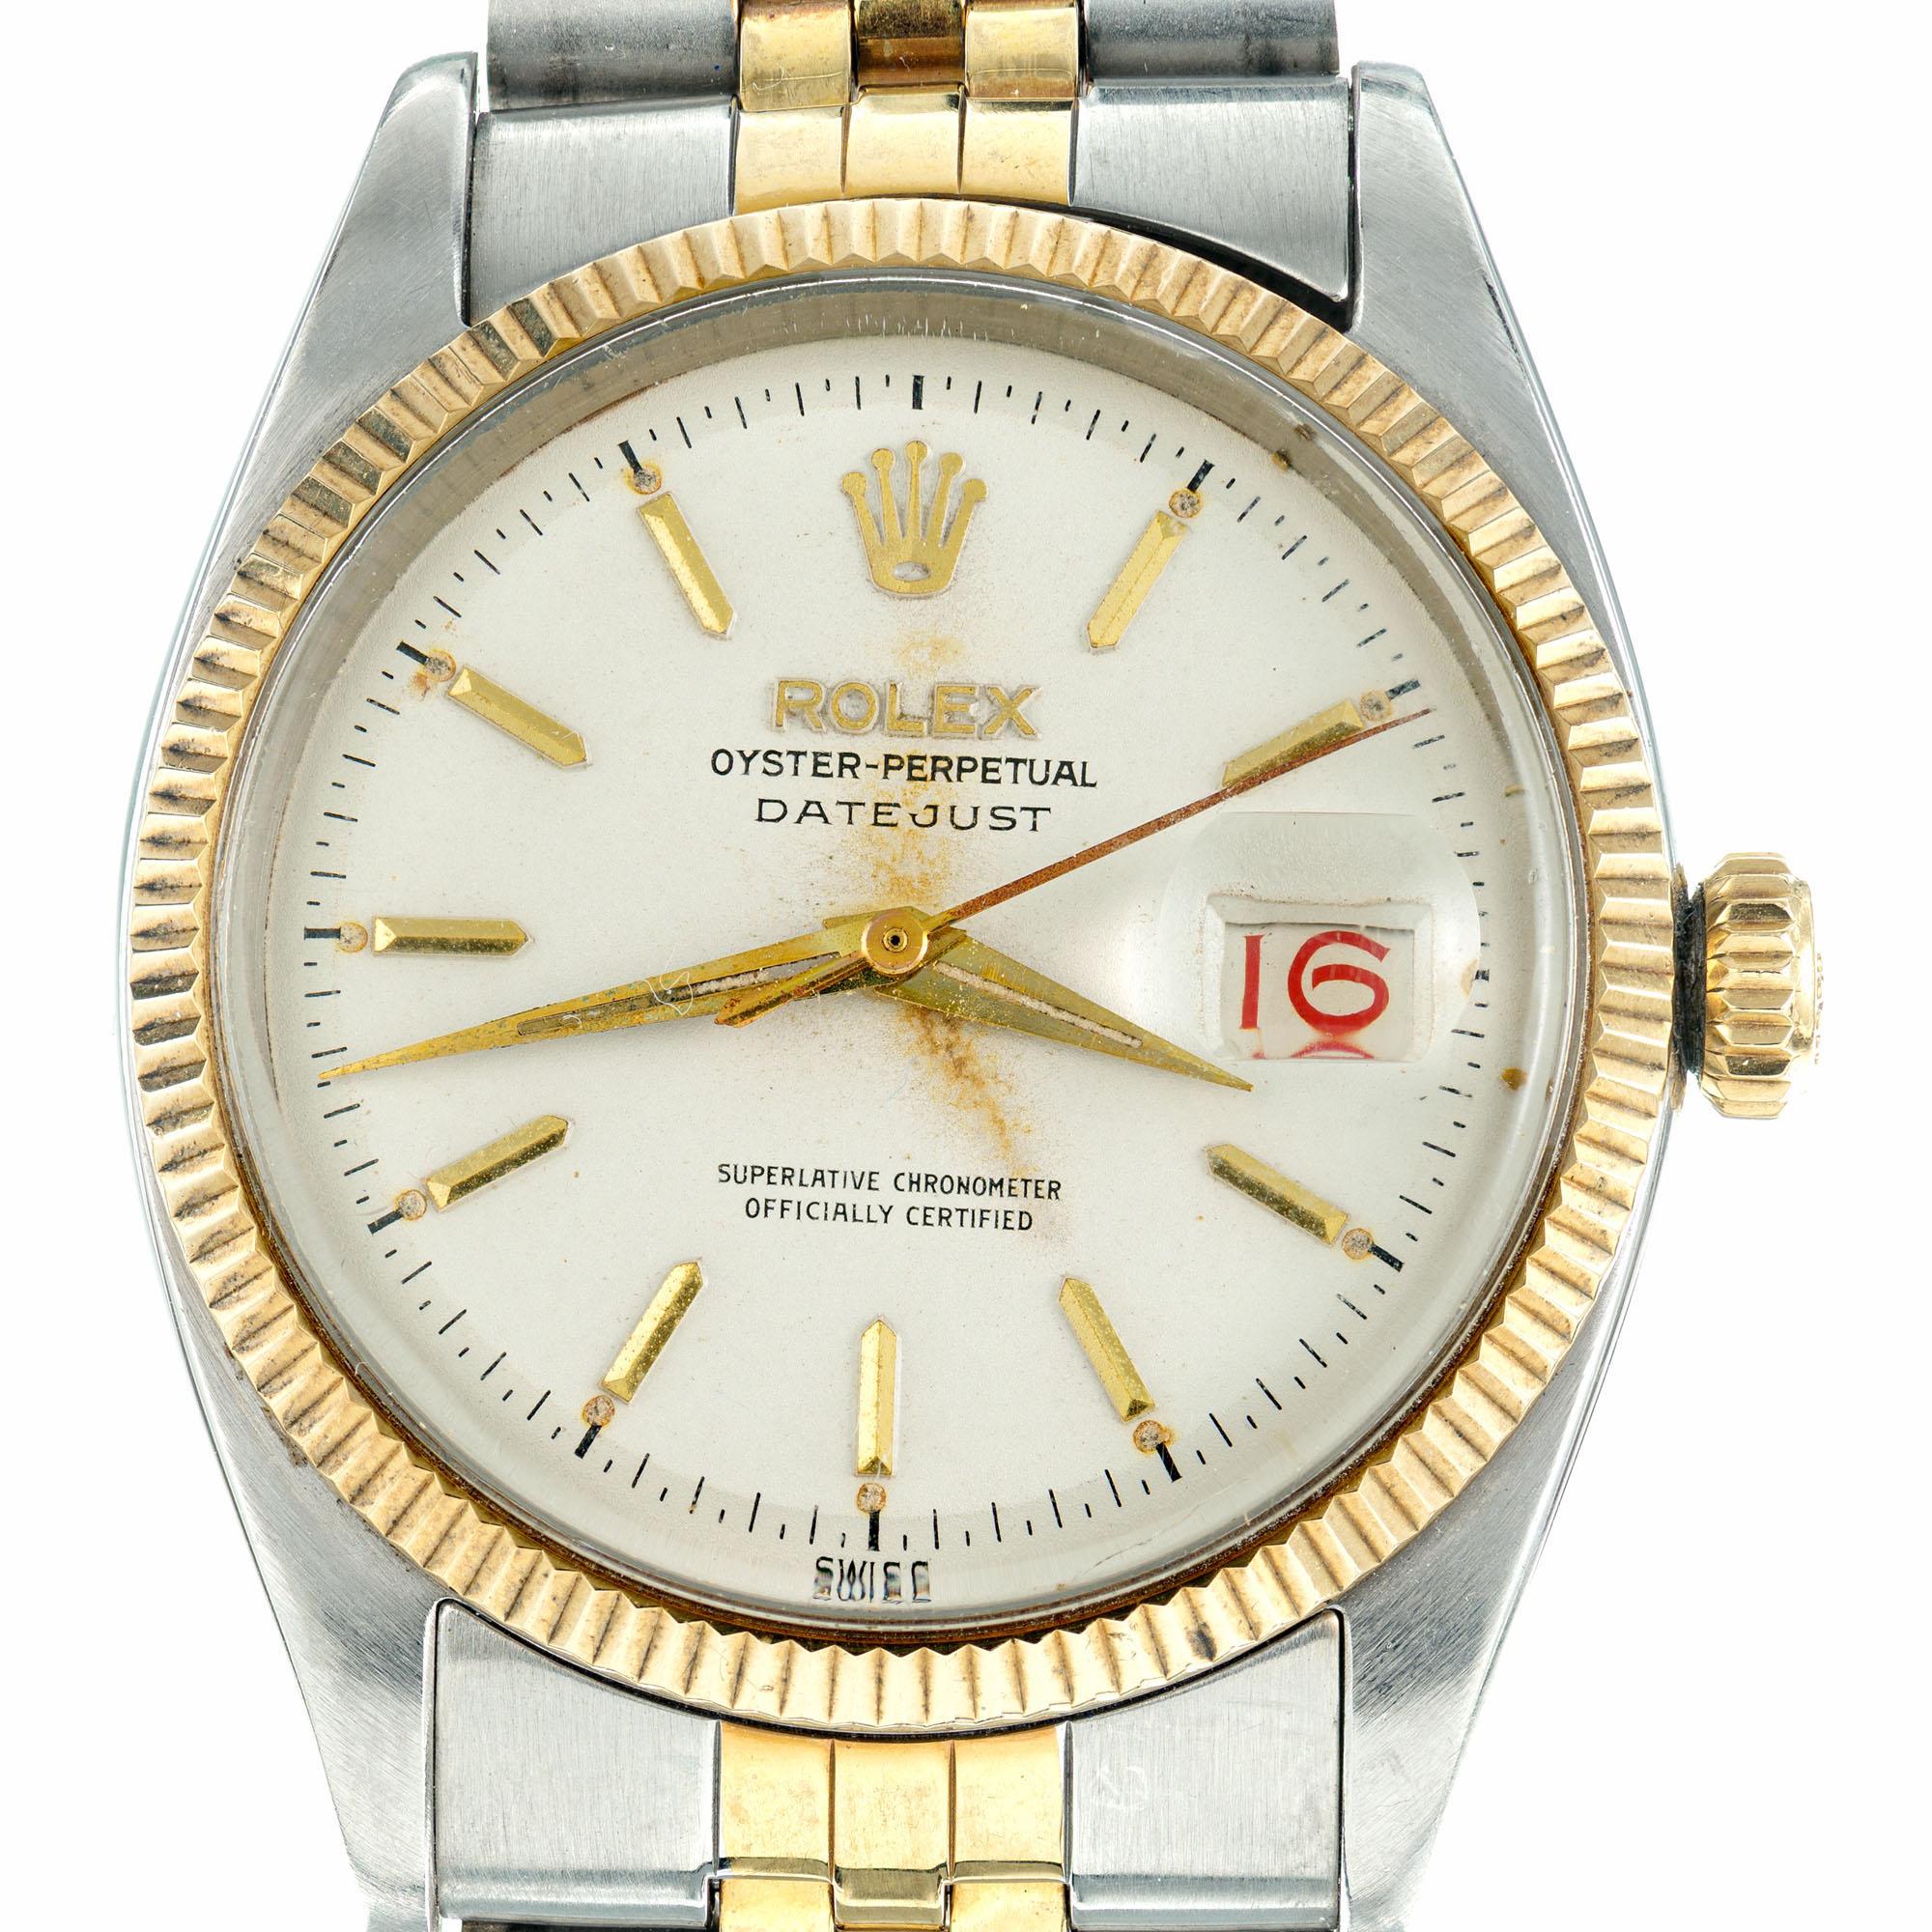 Rolex Stainless Steel and 14k Yellow Gold Datejust Wristwatch, Ref. 6605. Natural wear/patina on the dial.

Stainless steel and 14k yellow gold
Bracelet Length: 8 1/4 inches and adjustable
Grams: 91.3
Case length: 44.5mm
Width: 36mm
Bracelet width